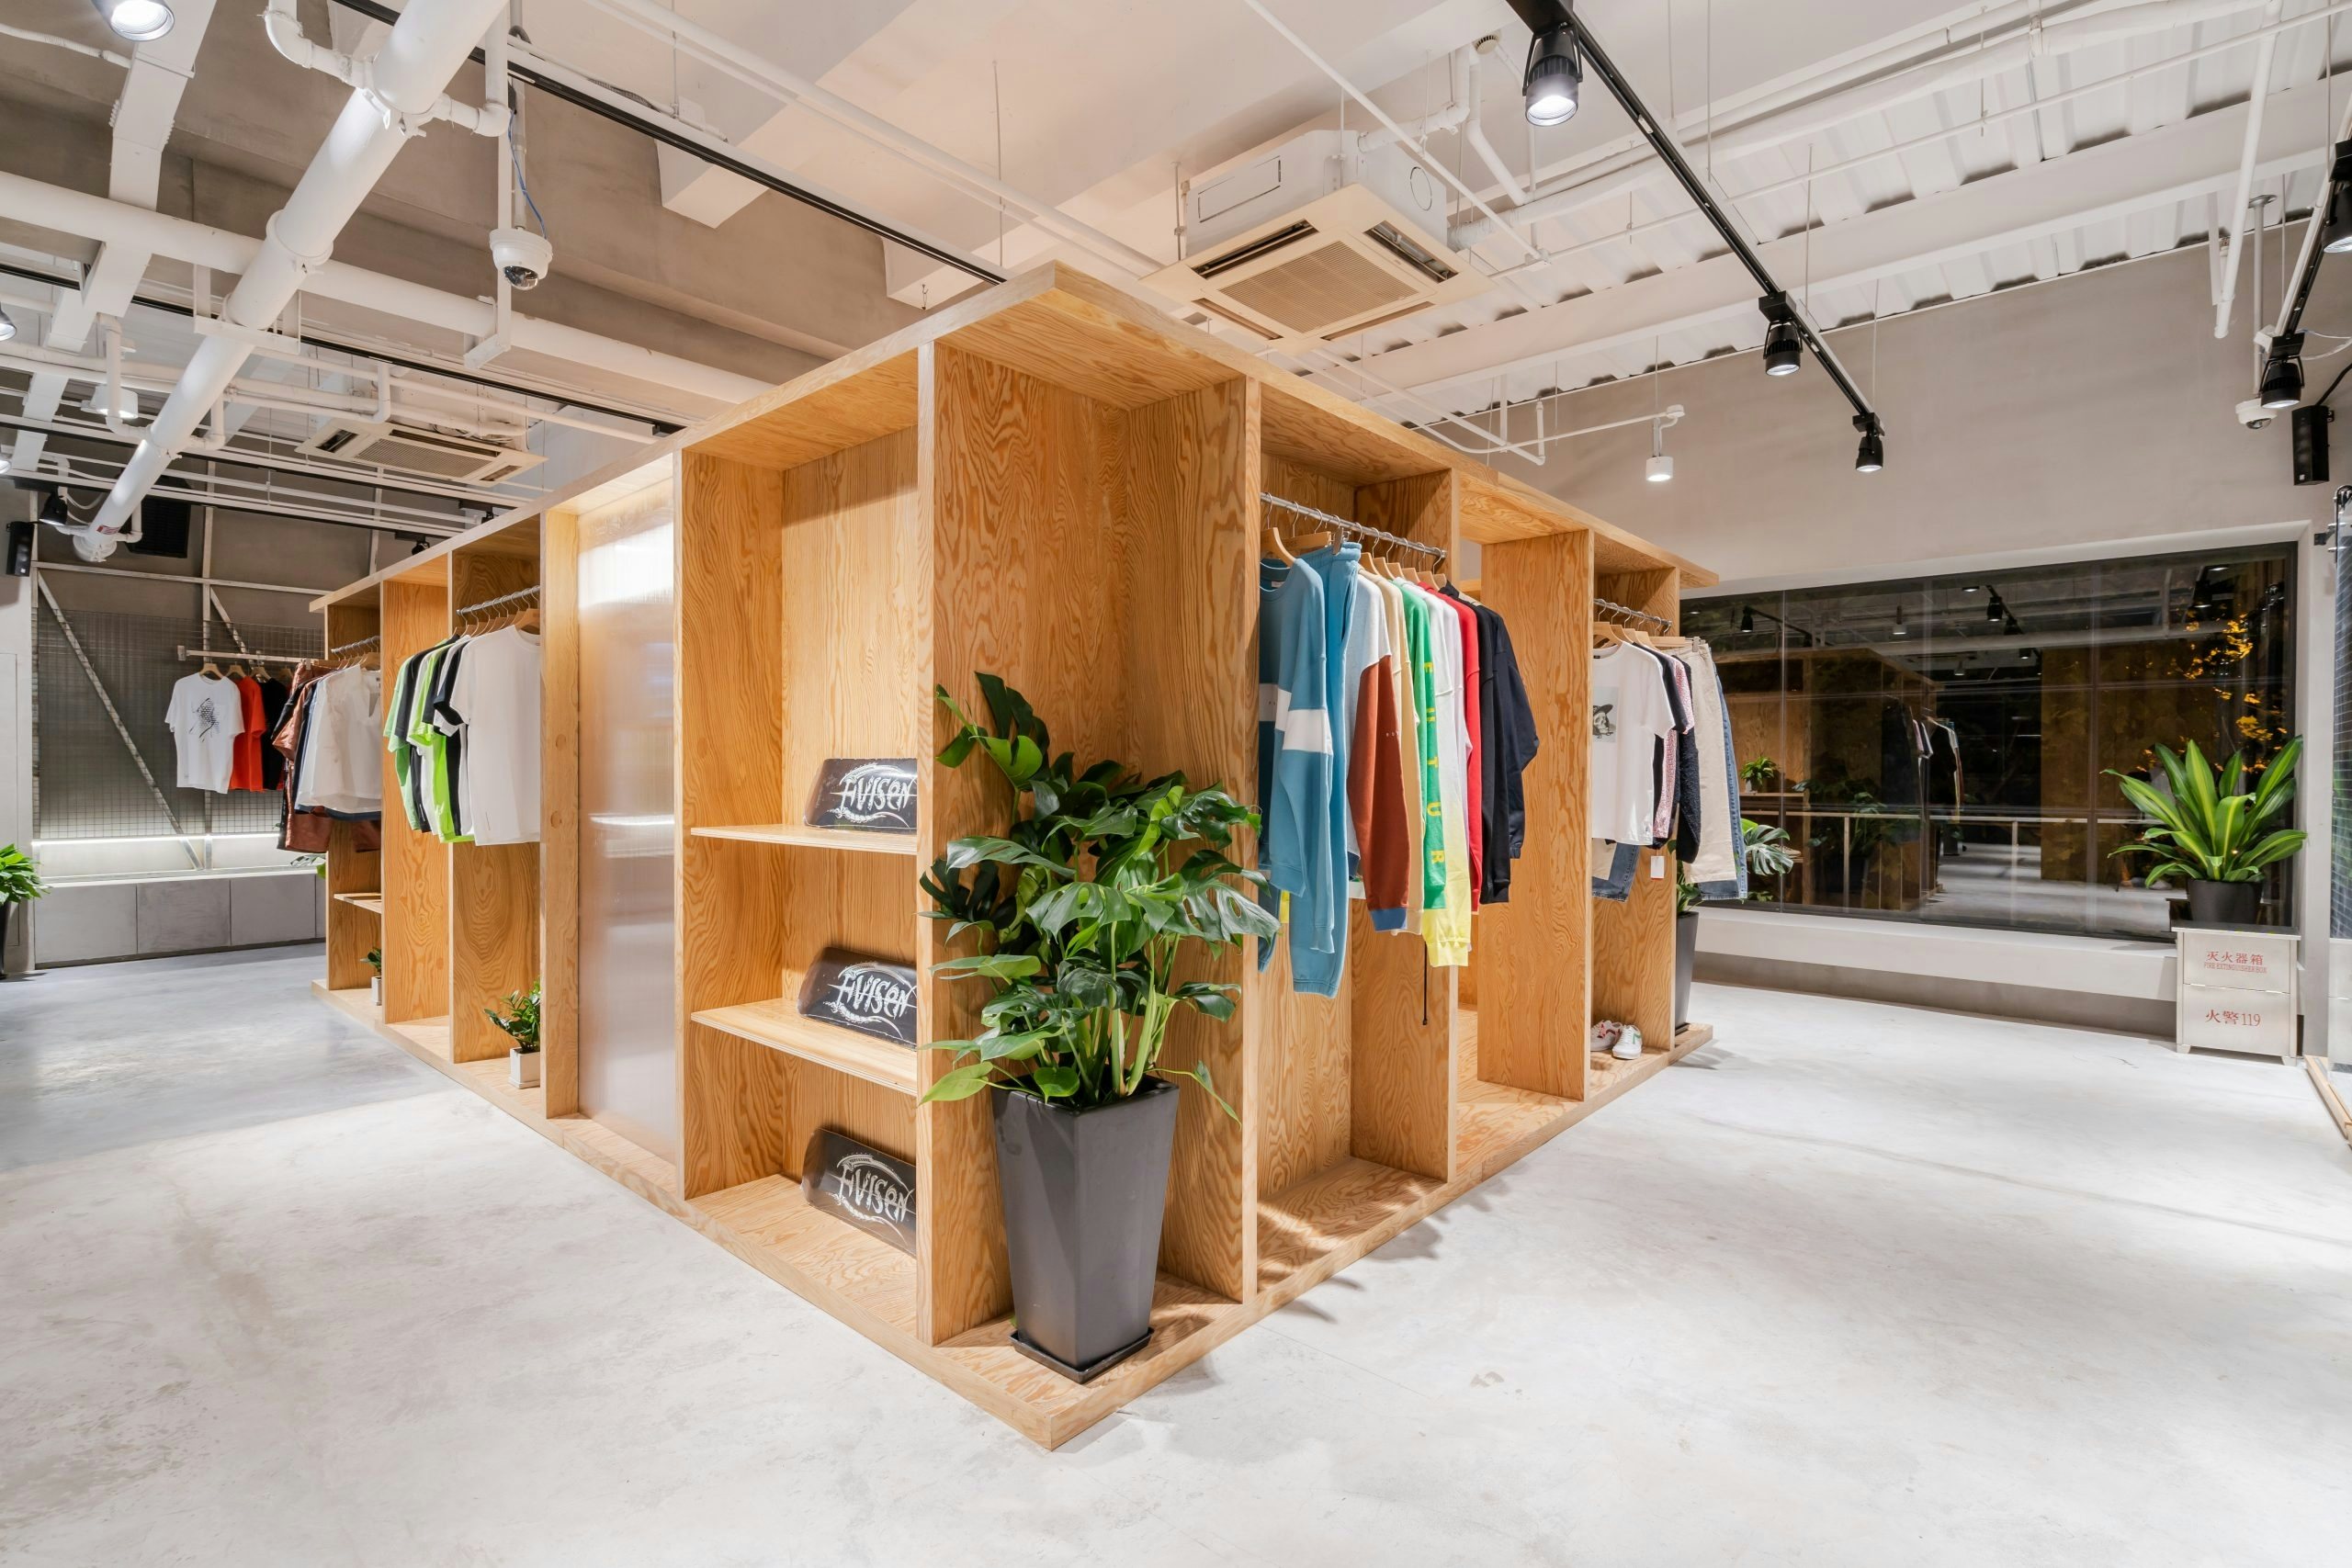 Through coffee culture, collaboration, and cool design, Doe Shanghai is shaking up the Chinese streetwear scene. Photo: Doe Shanghai